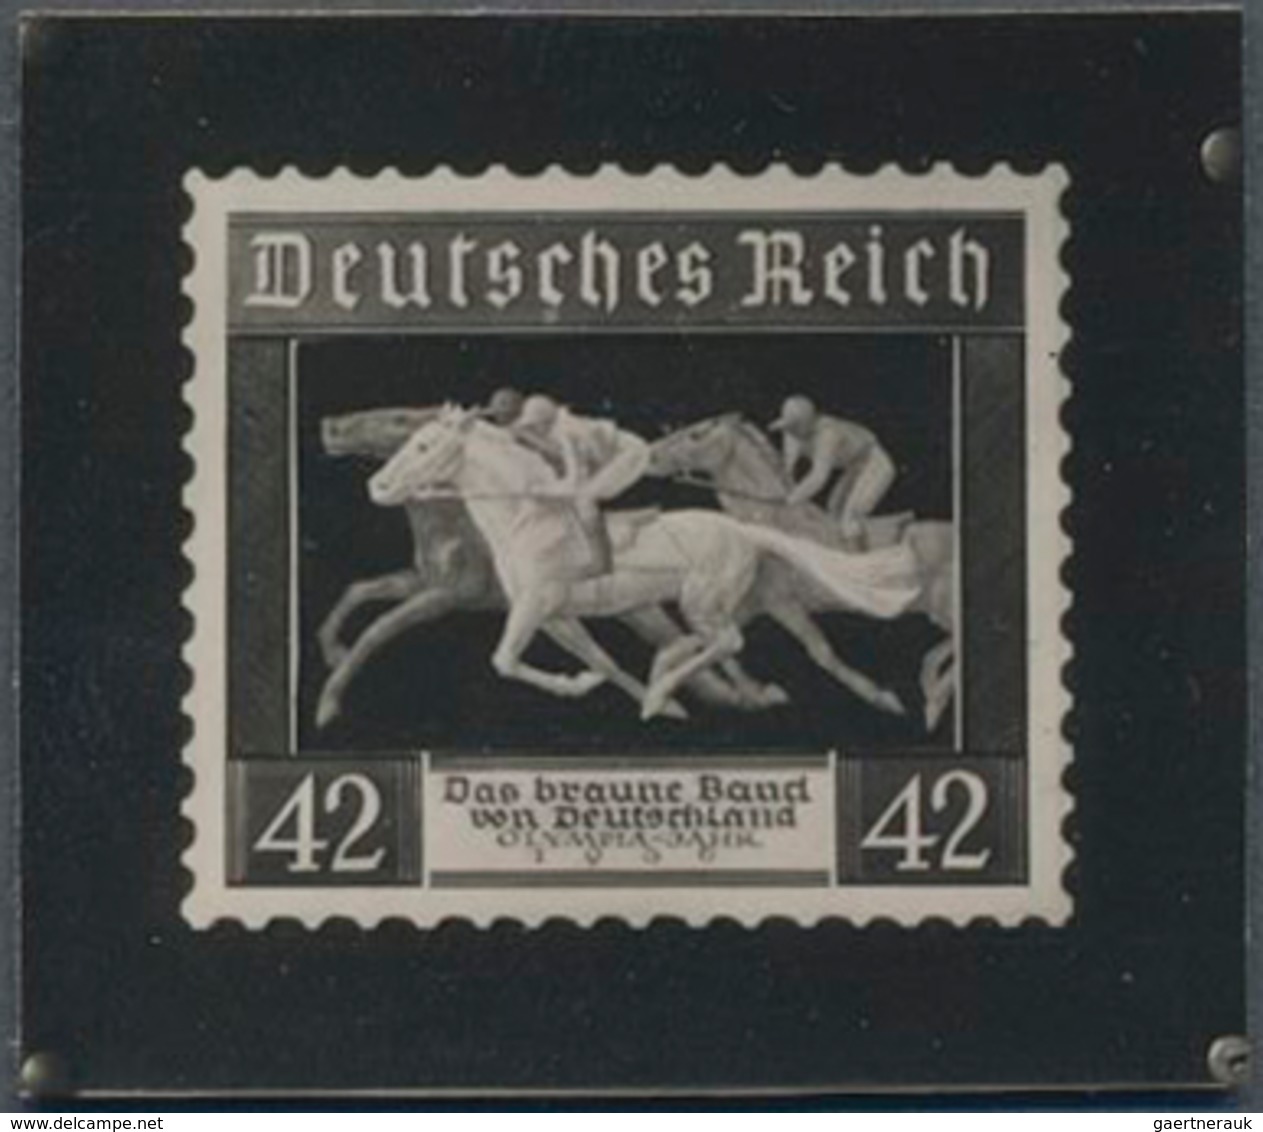 Deutsches Reich - 3. Reich: 1936, Photographic Essay In Reduced Size Of An Artist Stamp Project For - Covers & Documents